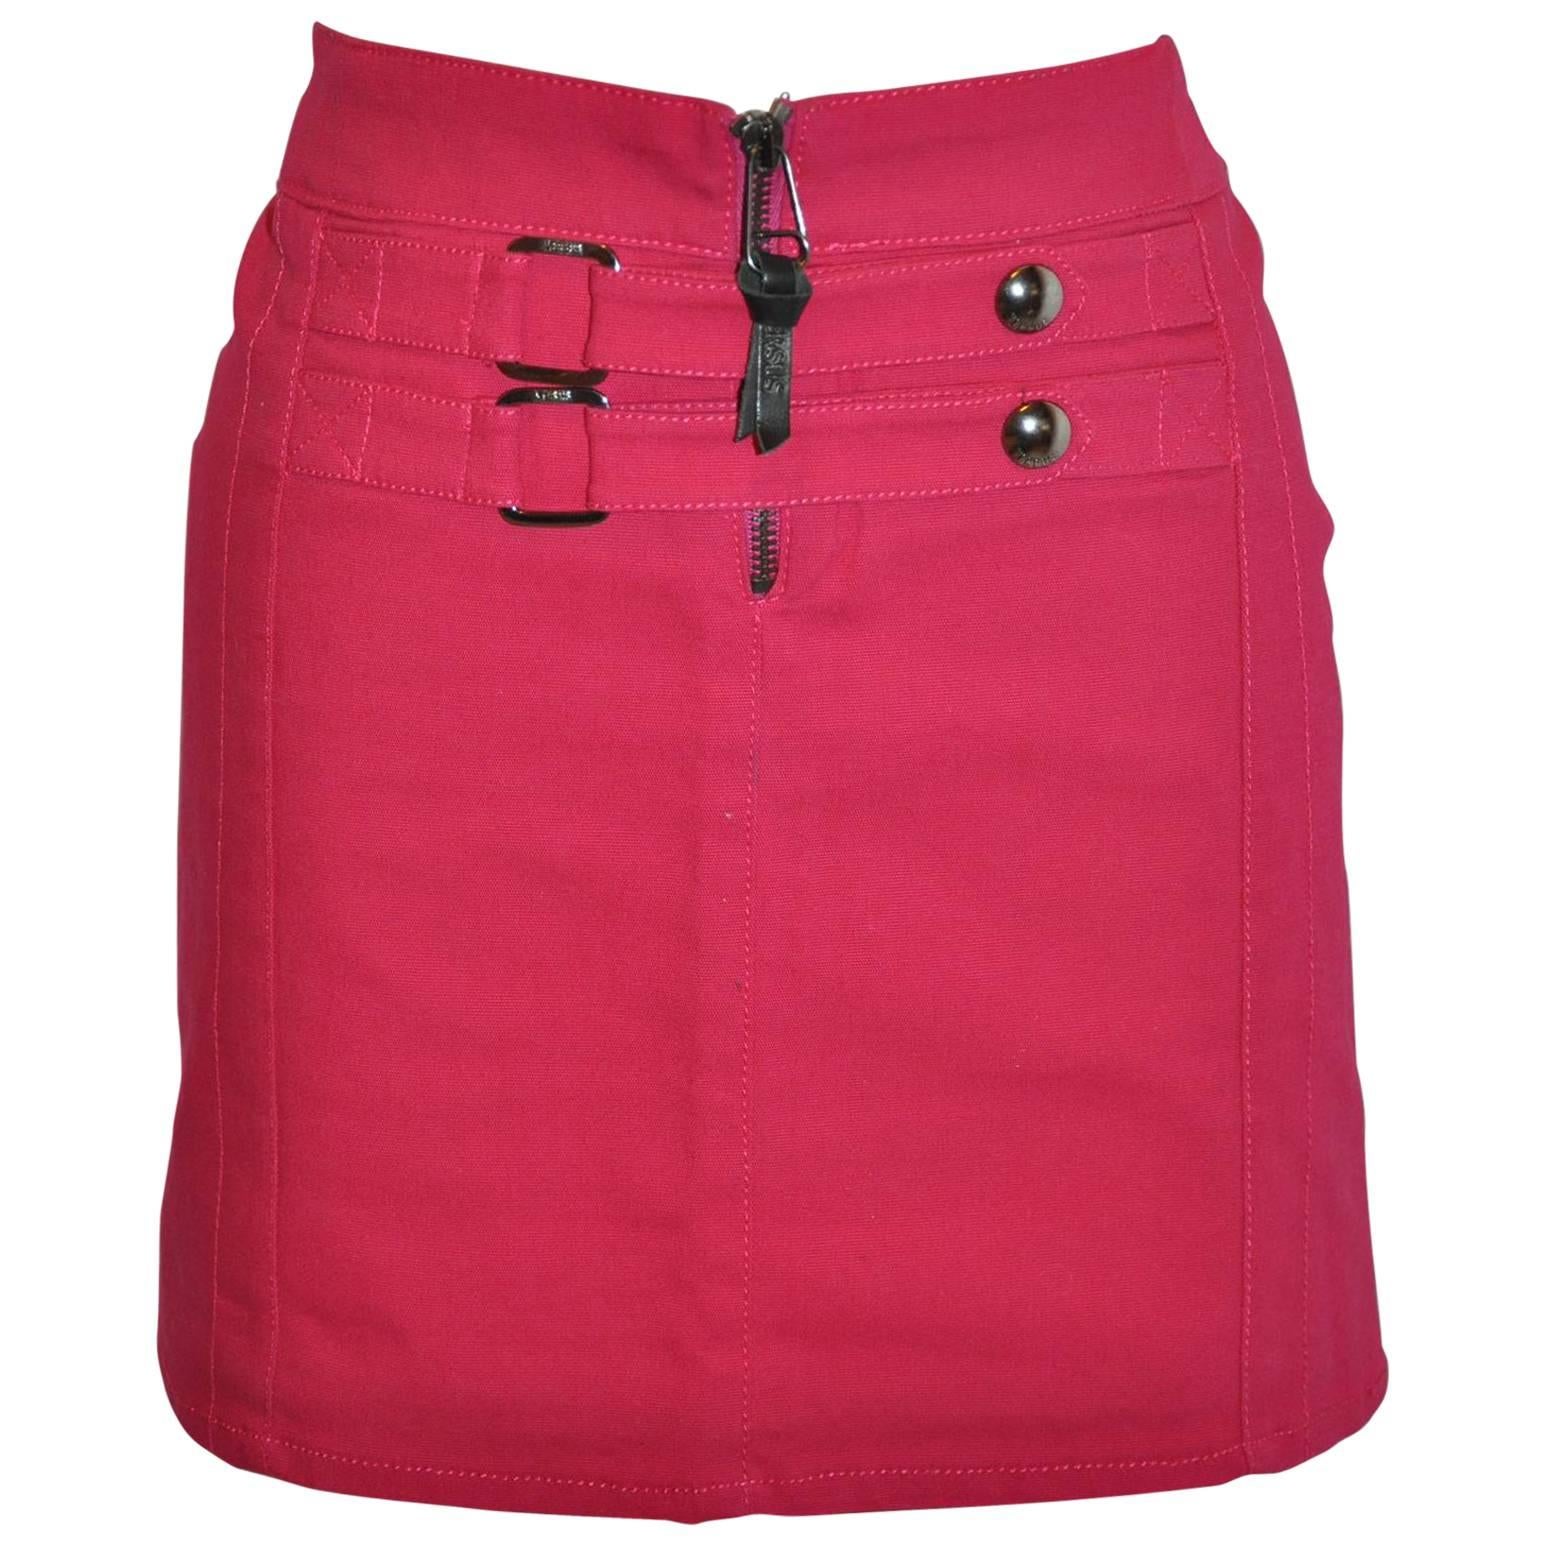 Gianni Versace Bold Fuchsia Stretch Buckled Detailing Mini Skirt For Sale